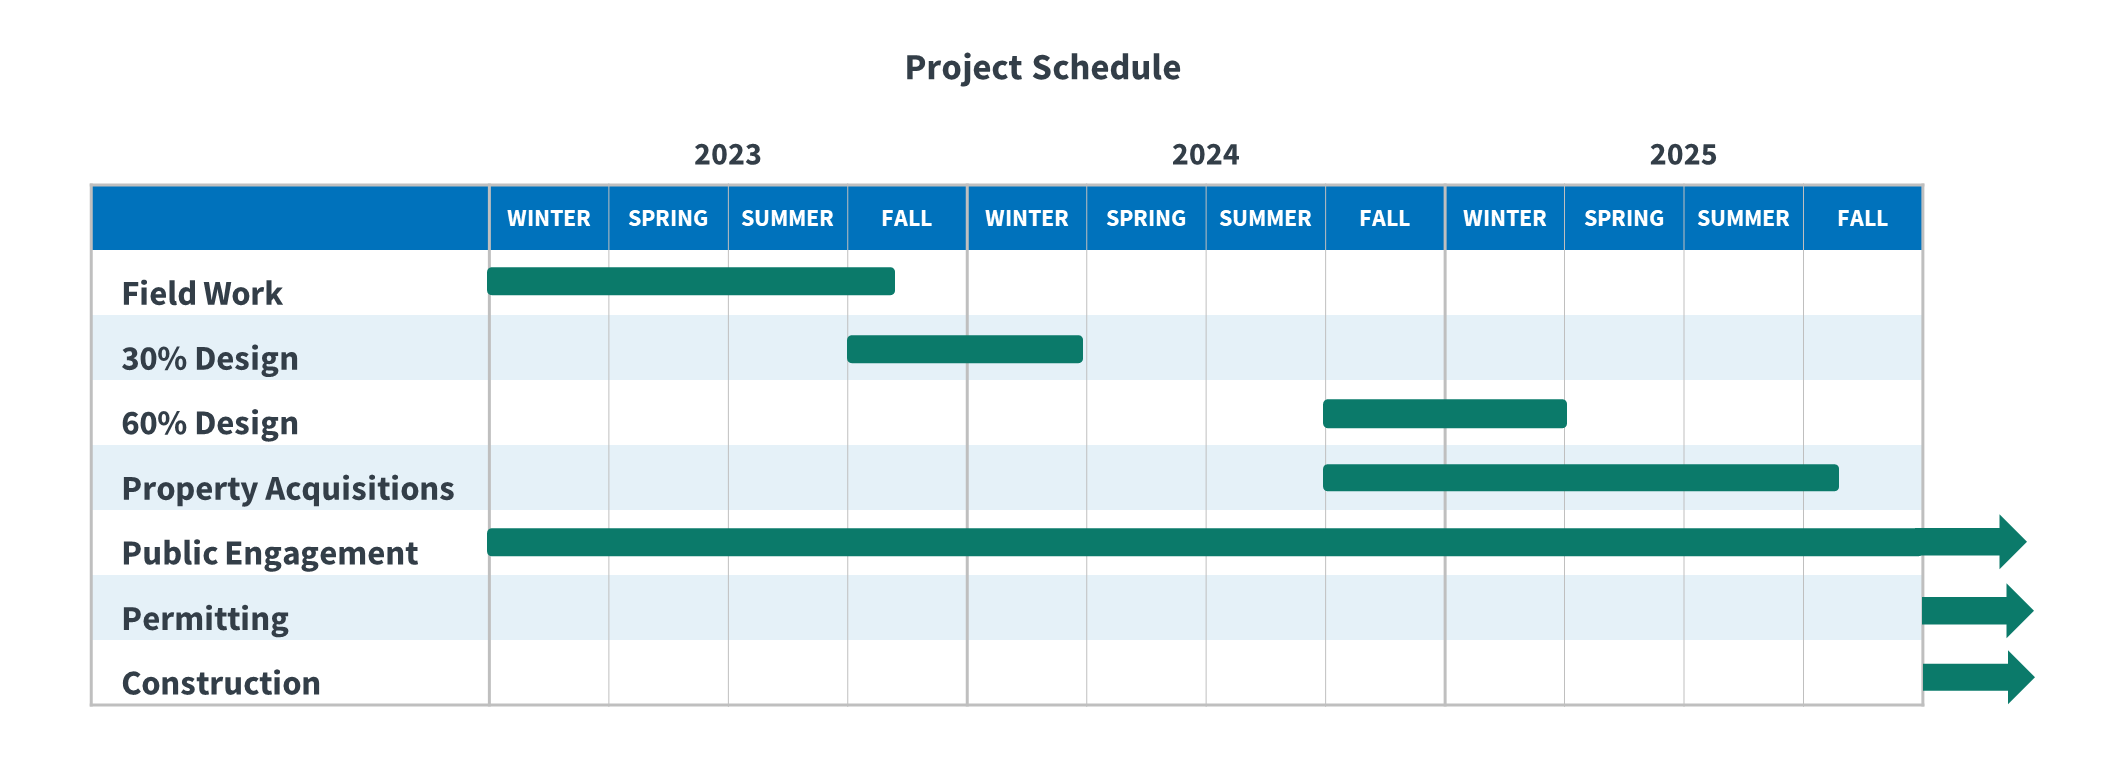 Project schedule: field work, from winter 2023 to mid-fall 2023; 30% design, from fall 2023 to winter 2024; 60% design, from fall 2024 to winter 2025; property acquisitions, from fall 2024 to fall 2025; public engagement, from winter 2023 to beyond 2025; permitting, starting beyond 2025; construction, starting beyond 2025